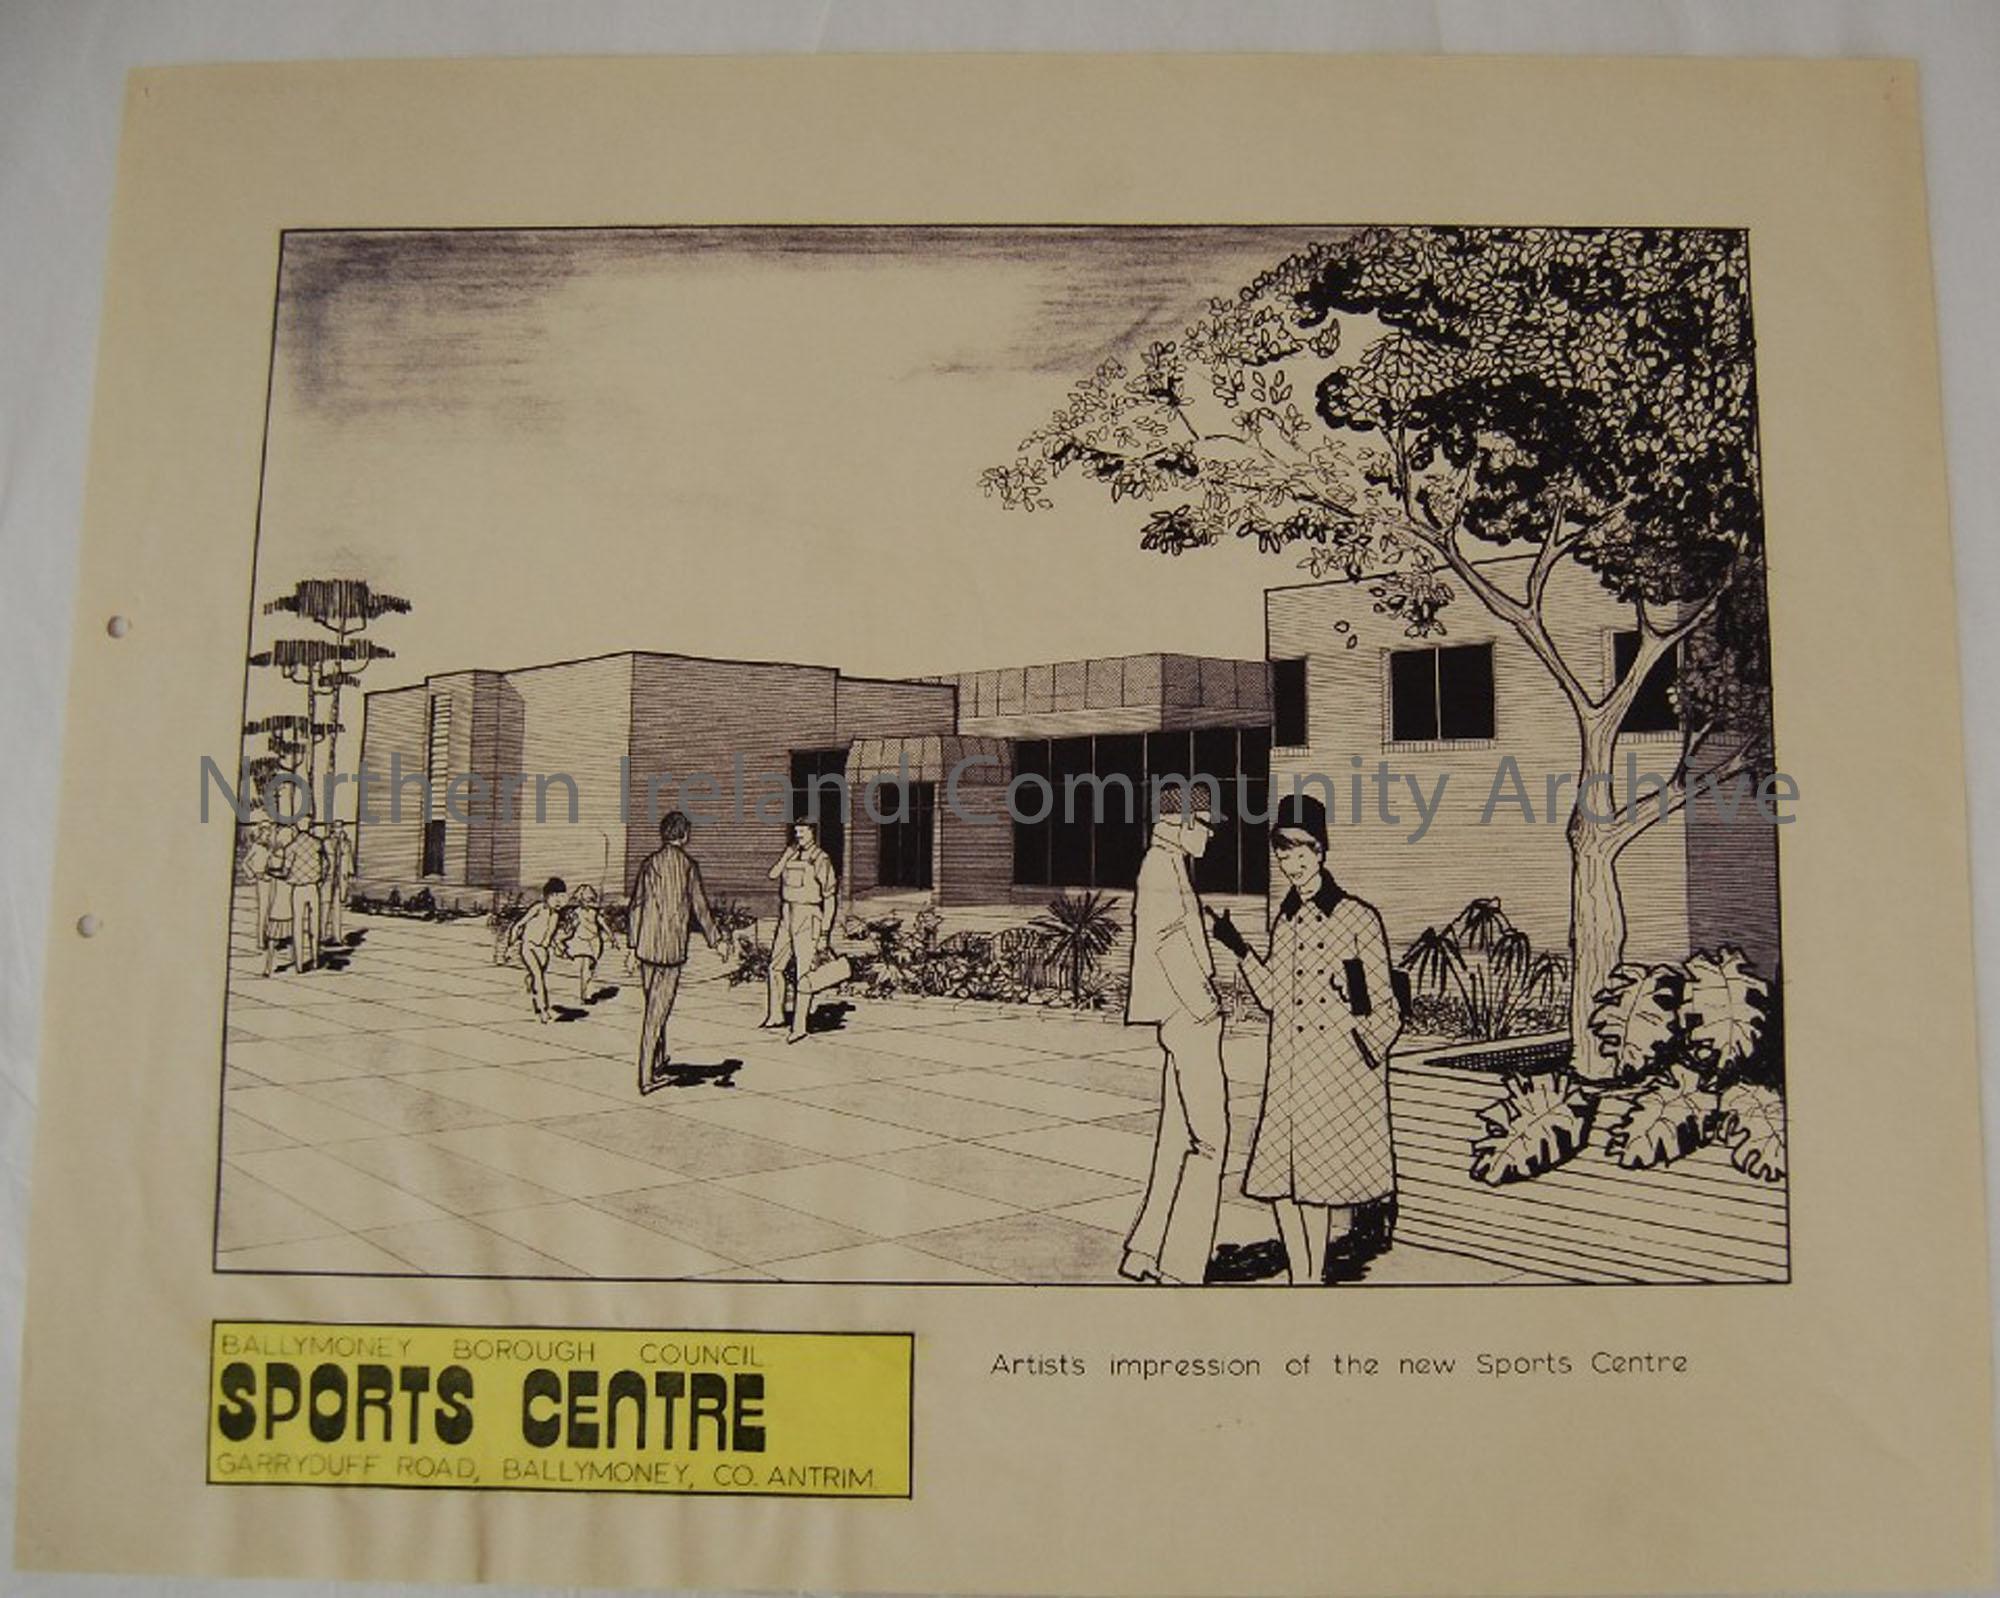 Drawing of the Sports Centre, looking at it from the front; see BHC:1998.165